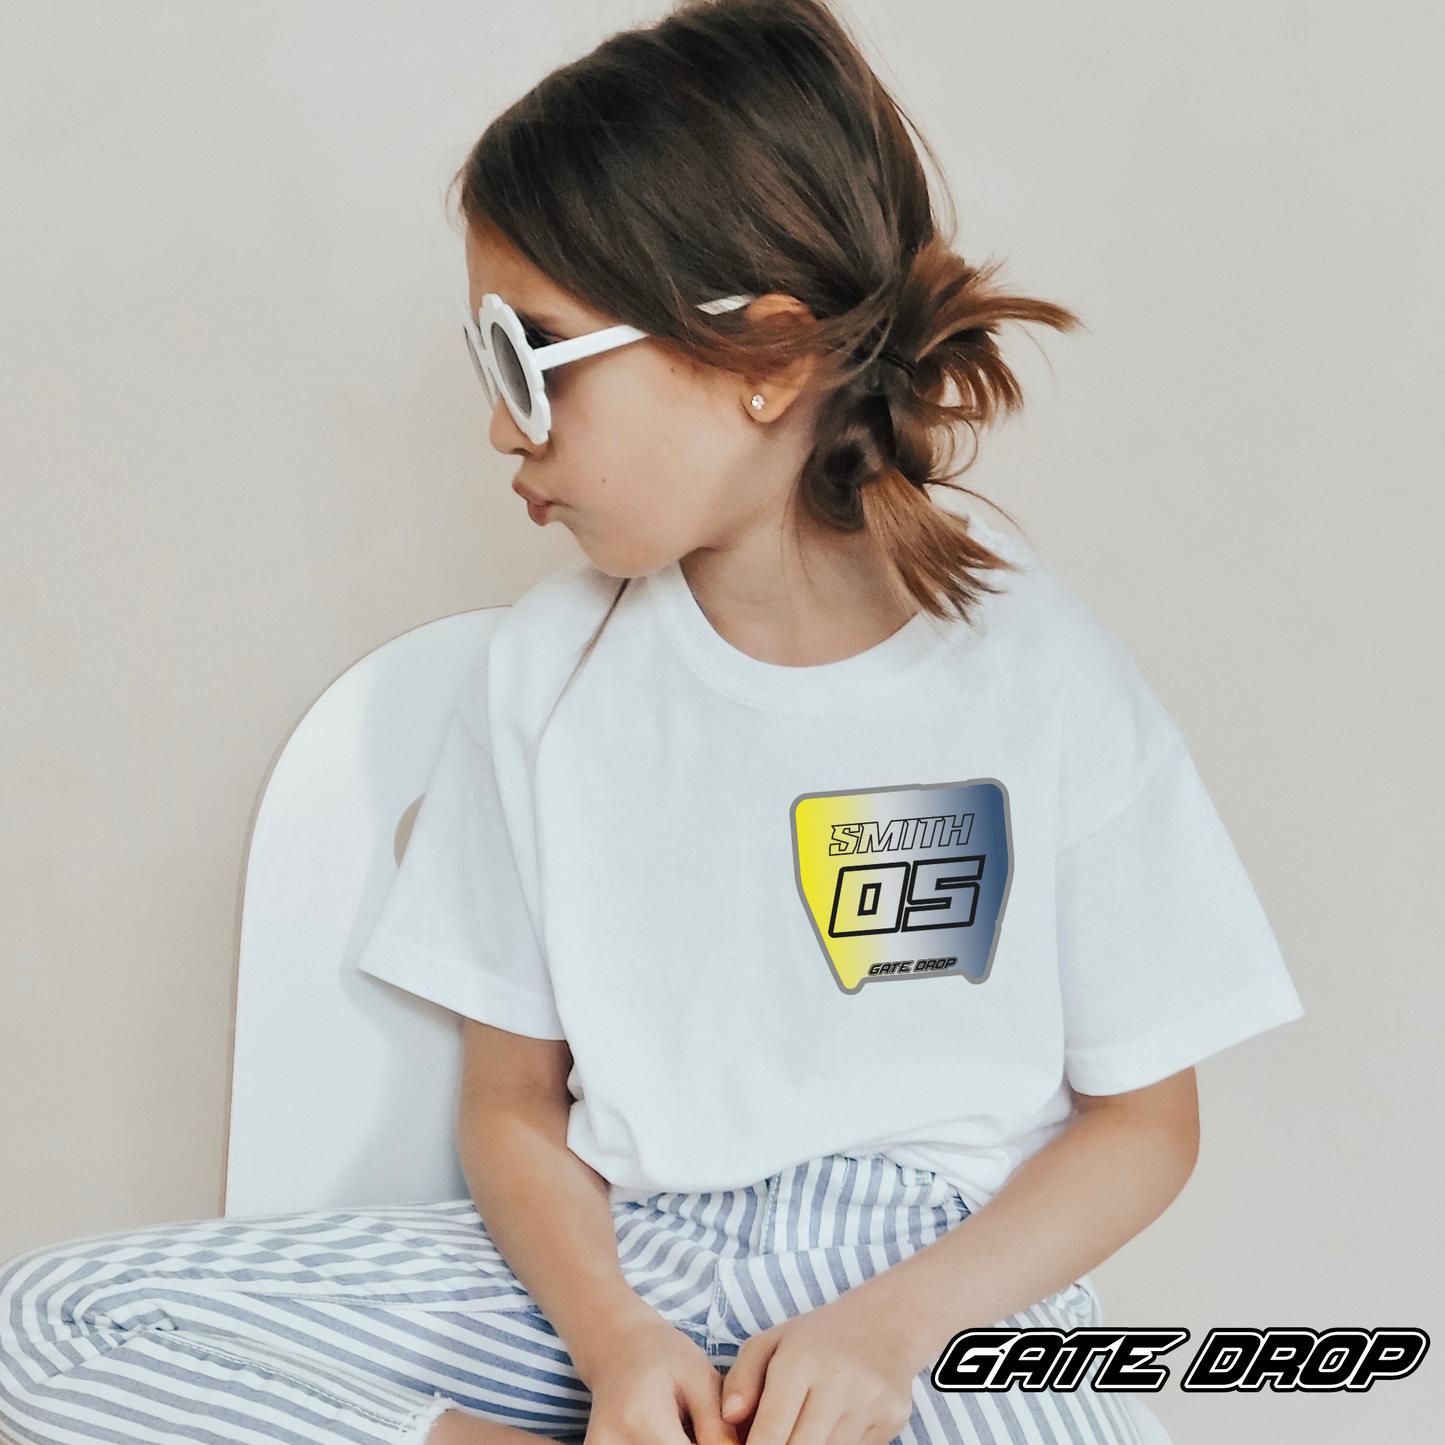 Gate Drop Motocross Gradient Plate with Custom Name and Number Youth Tee Shirt